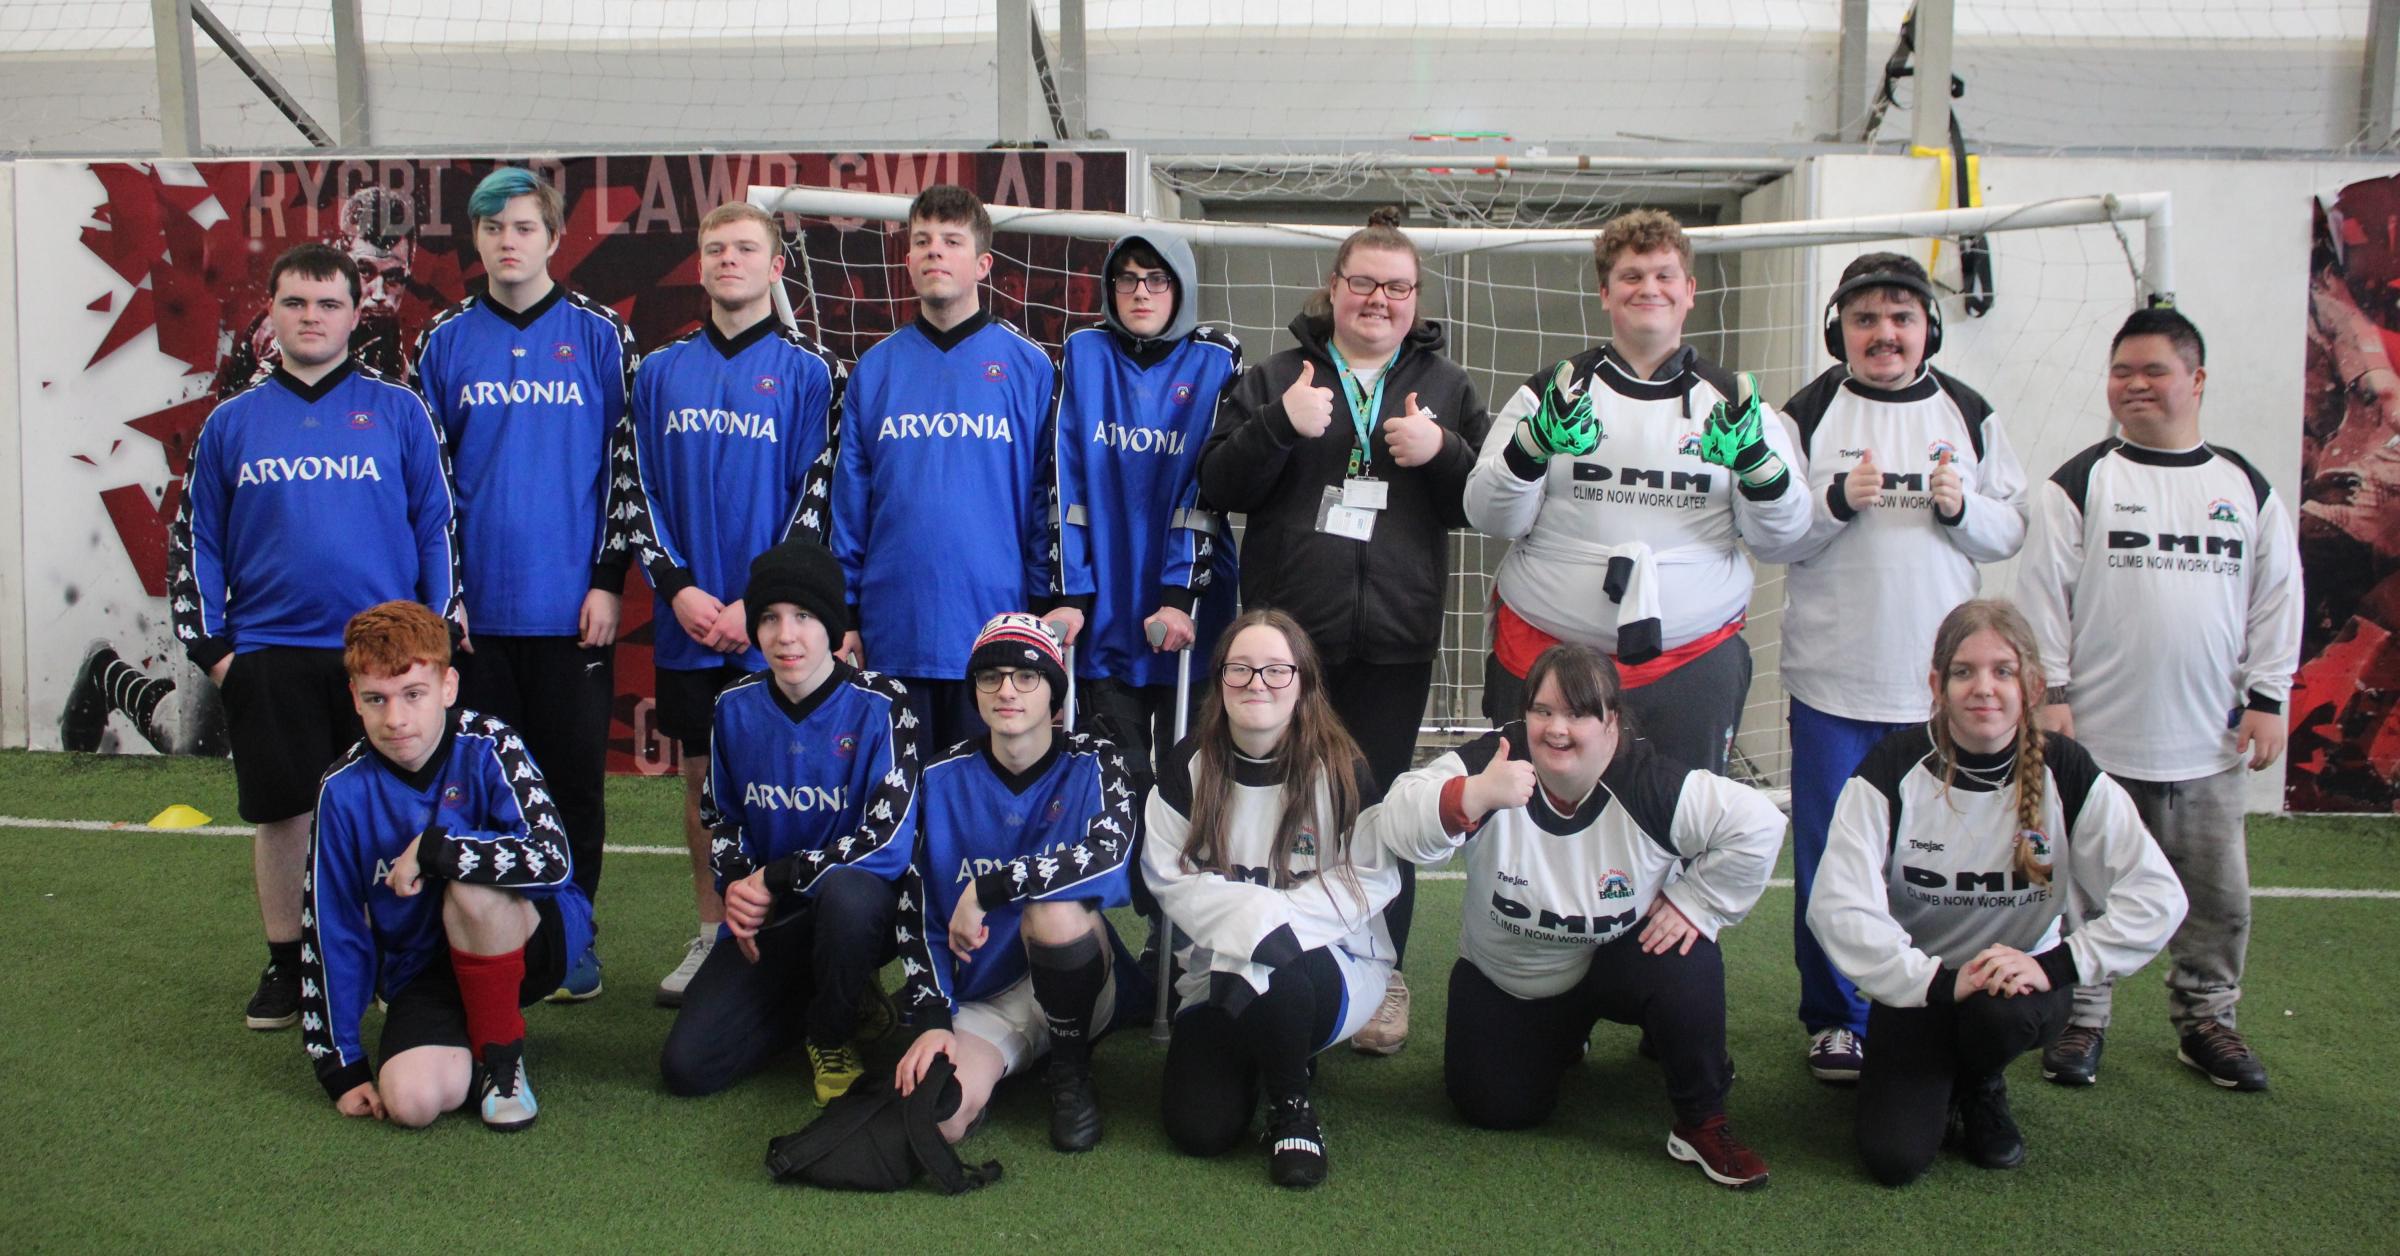 Coleg Meirion-Dwyfor and Coleg Glynllifon students at the Ability Counts Football Tournament at The Barn in Parc Eirias, Colwyn Bay.